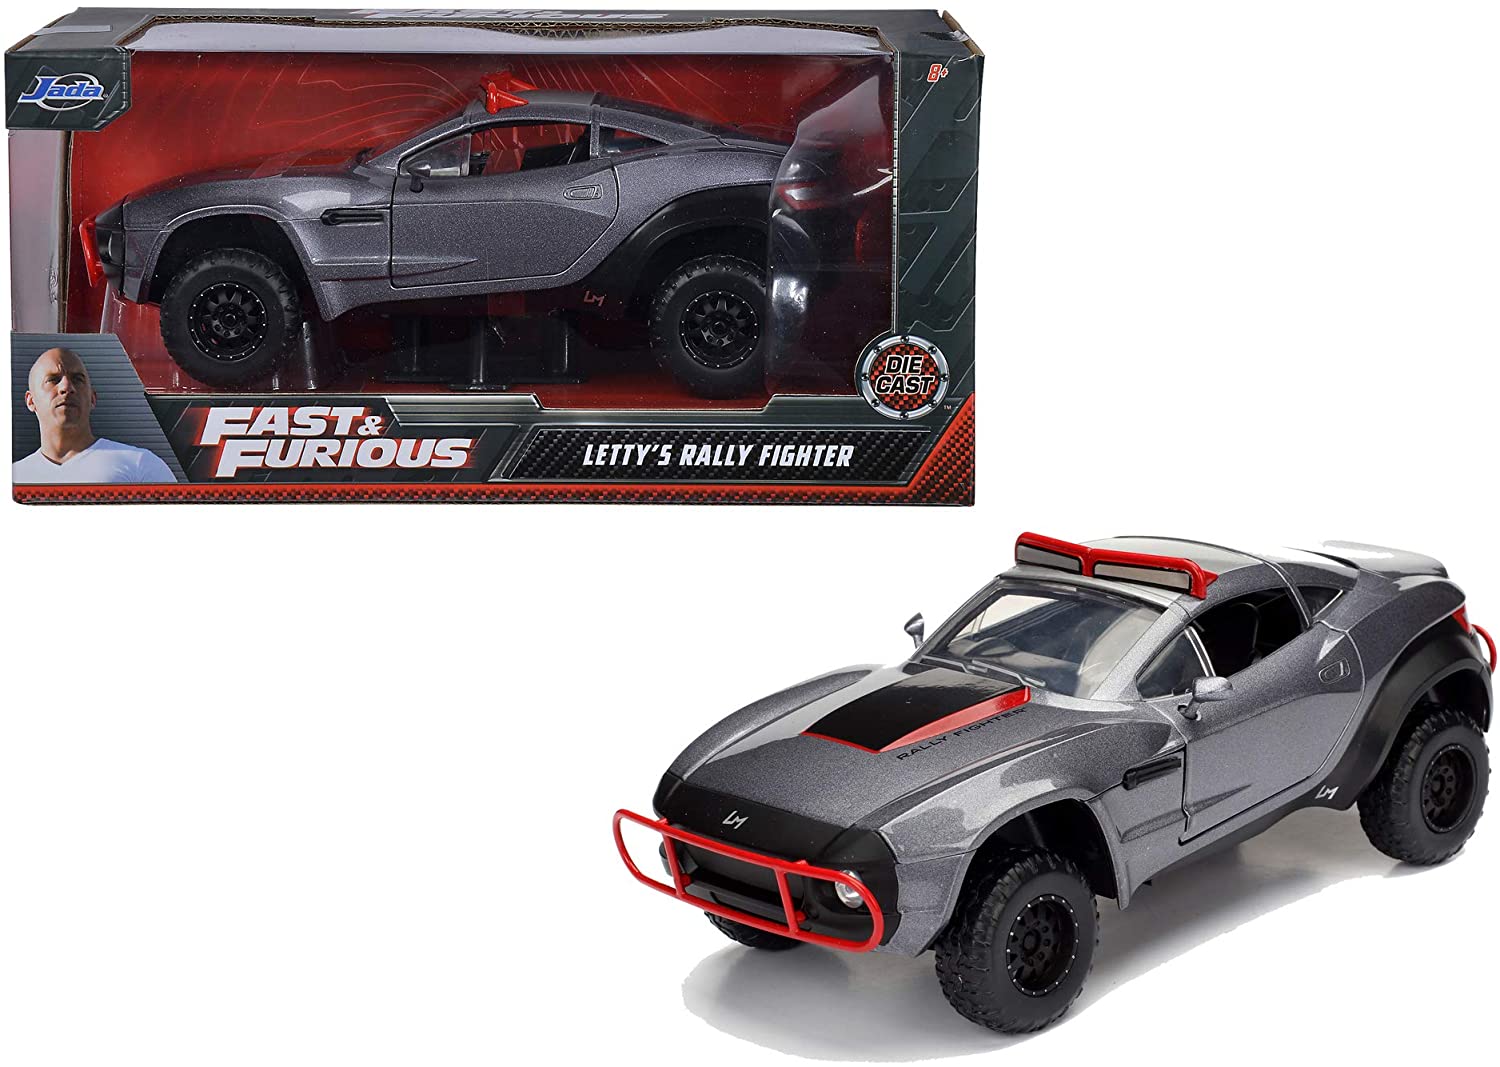 Fast & Furious Lettys Rally Fighter 1:24